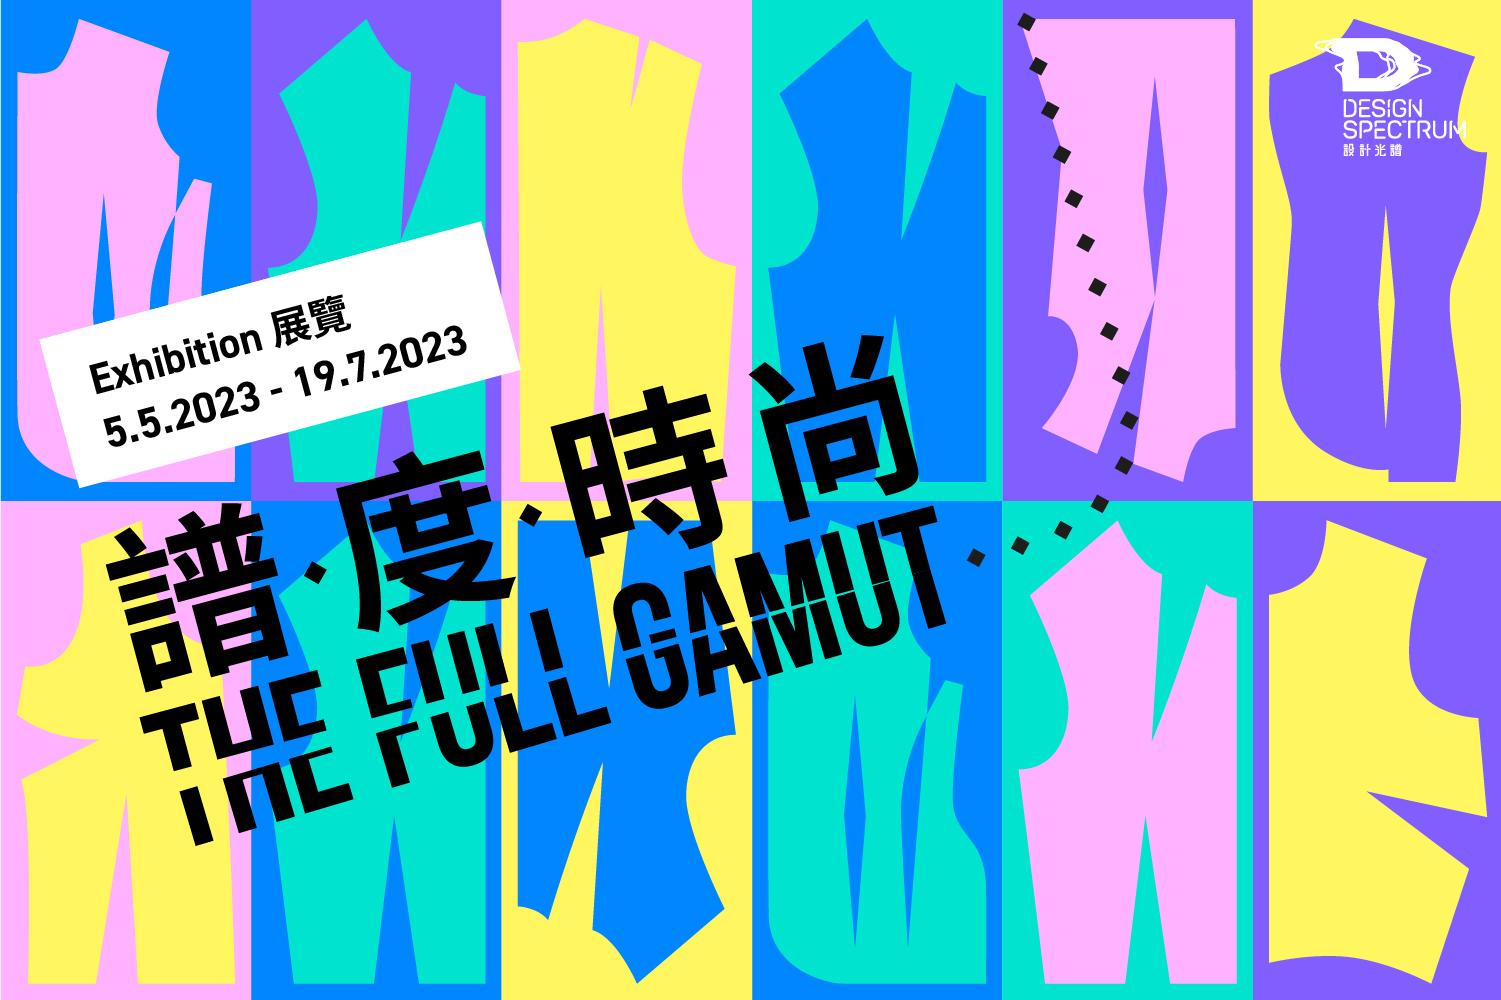 Design Spectrum Presents ‘The Full Gamut’ Exhibition - Fashion Synergizes with Cross-disciplinary Design